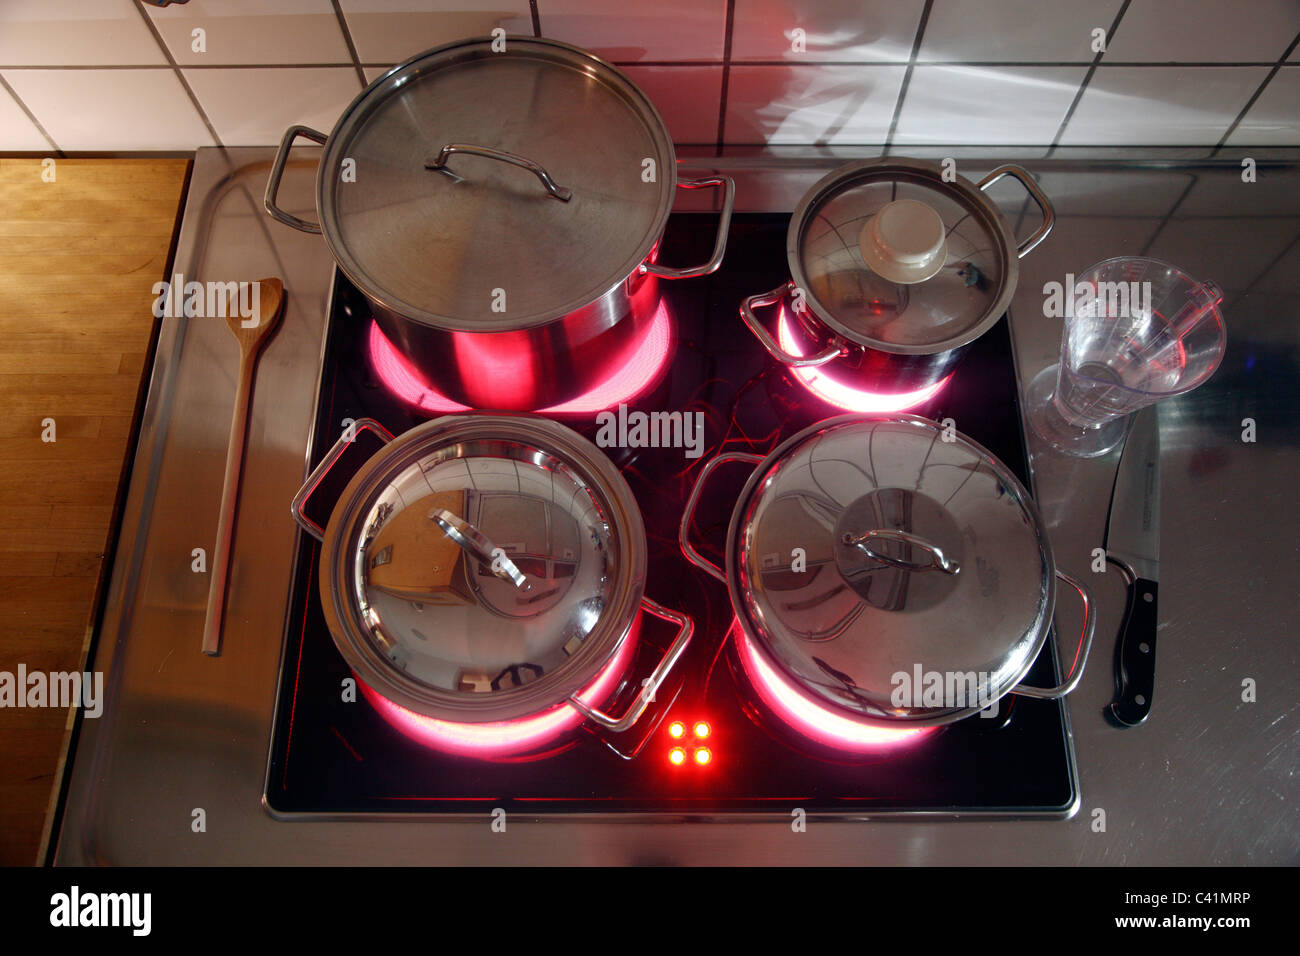 home kitchen, cooking pots, made of stainless steel, on a hot glass-ceramic cooking ring. red, hot glowing. Stock Photo